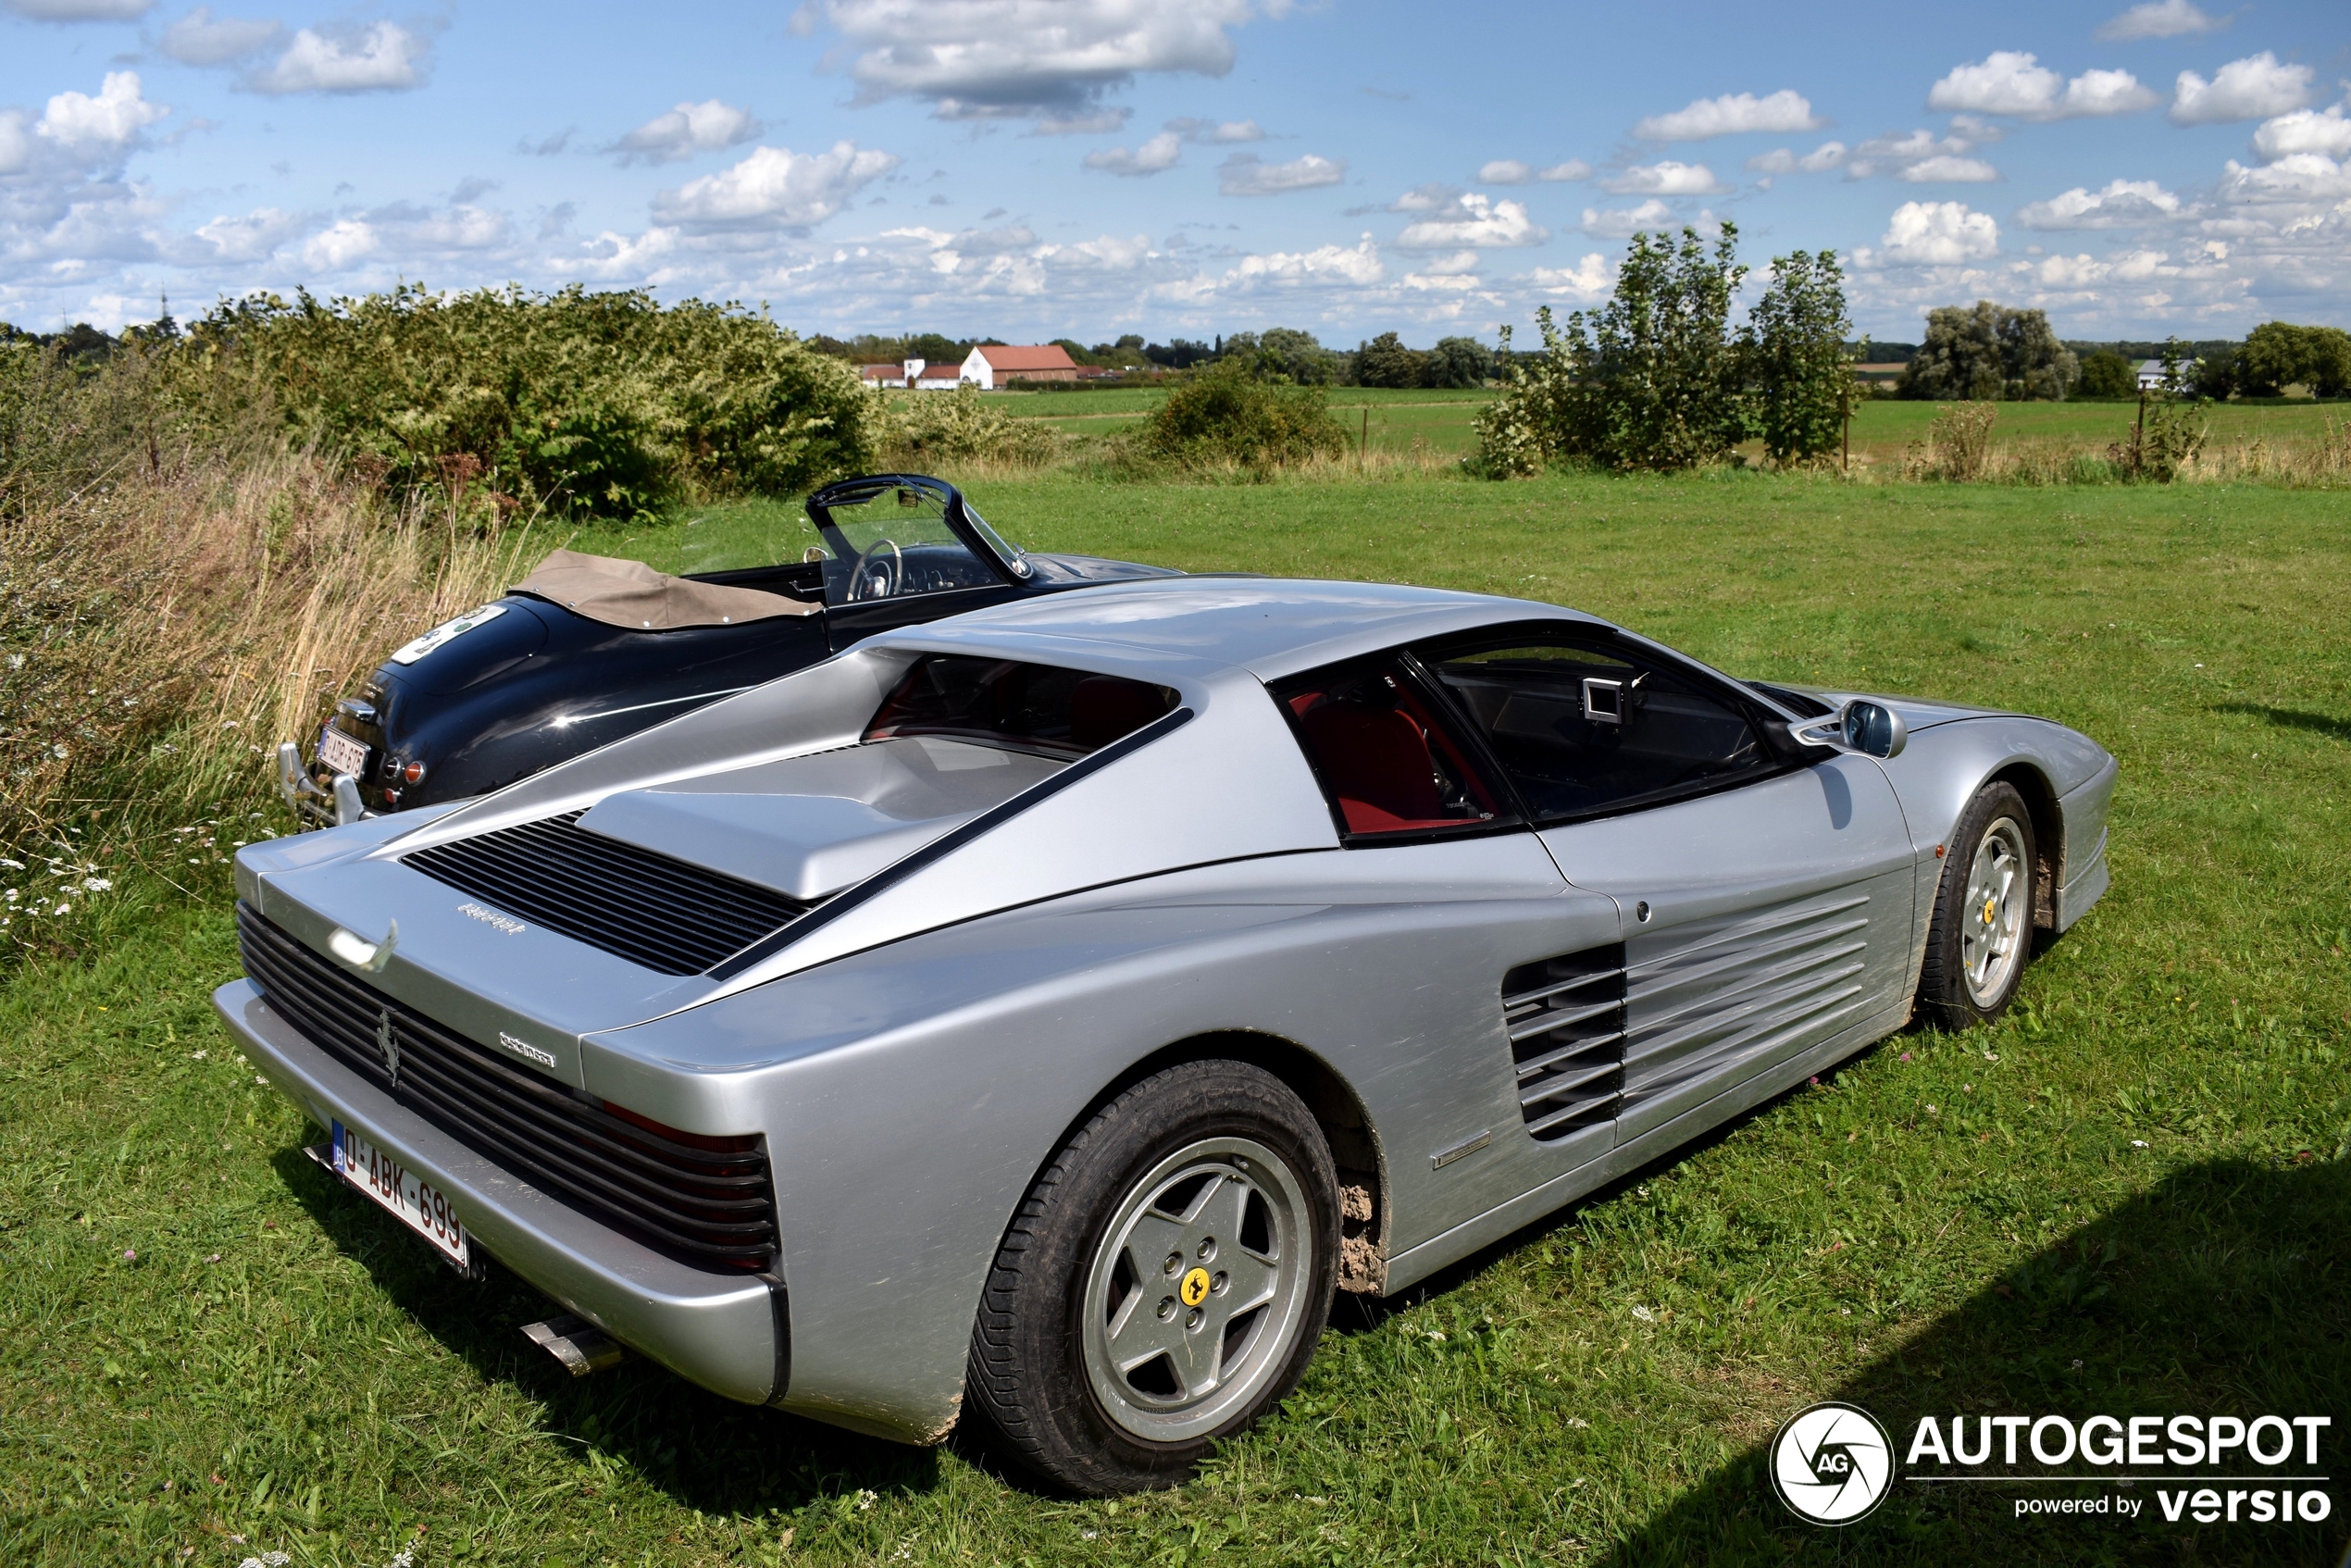 Did the Testarossa have a V-engine or a flat engine?